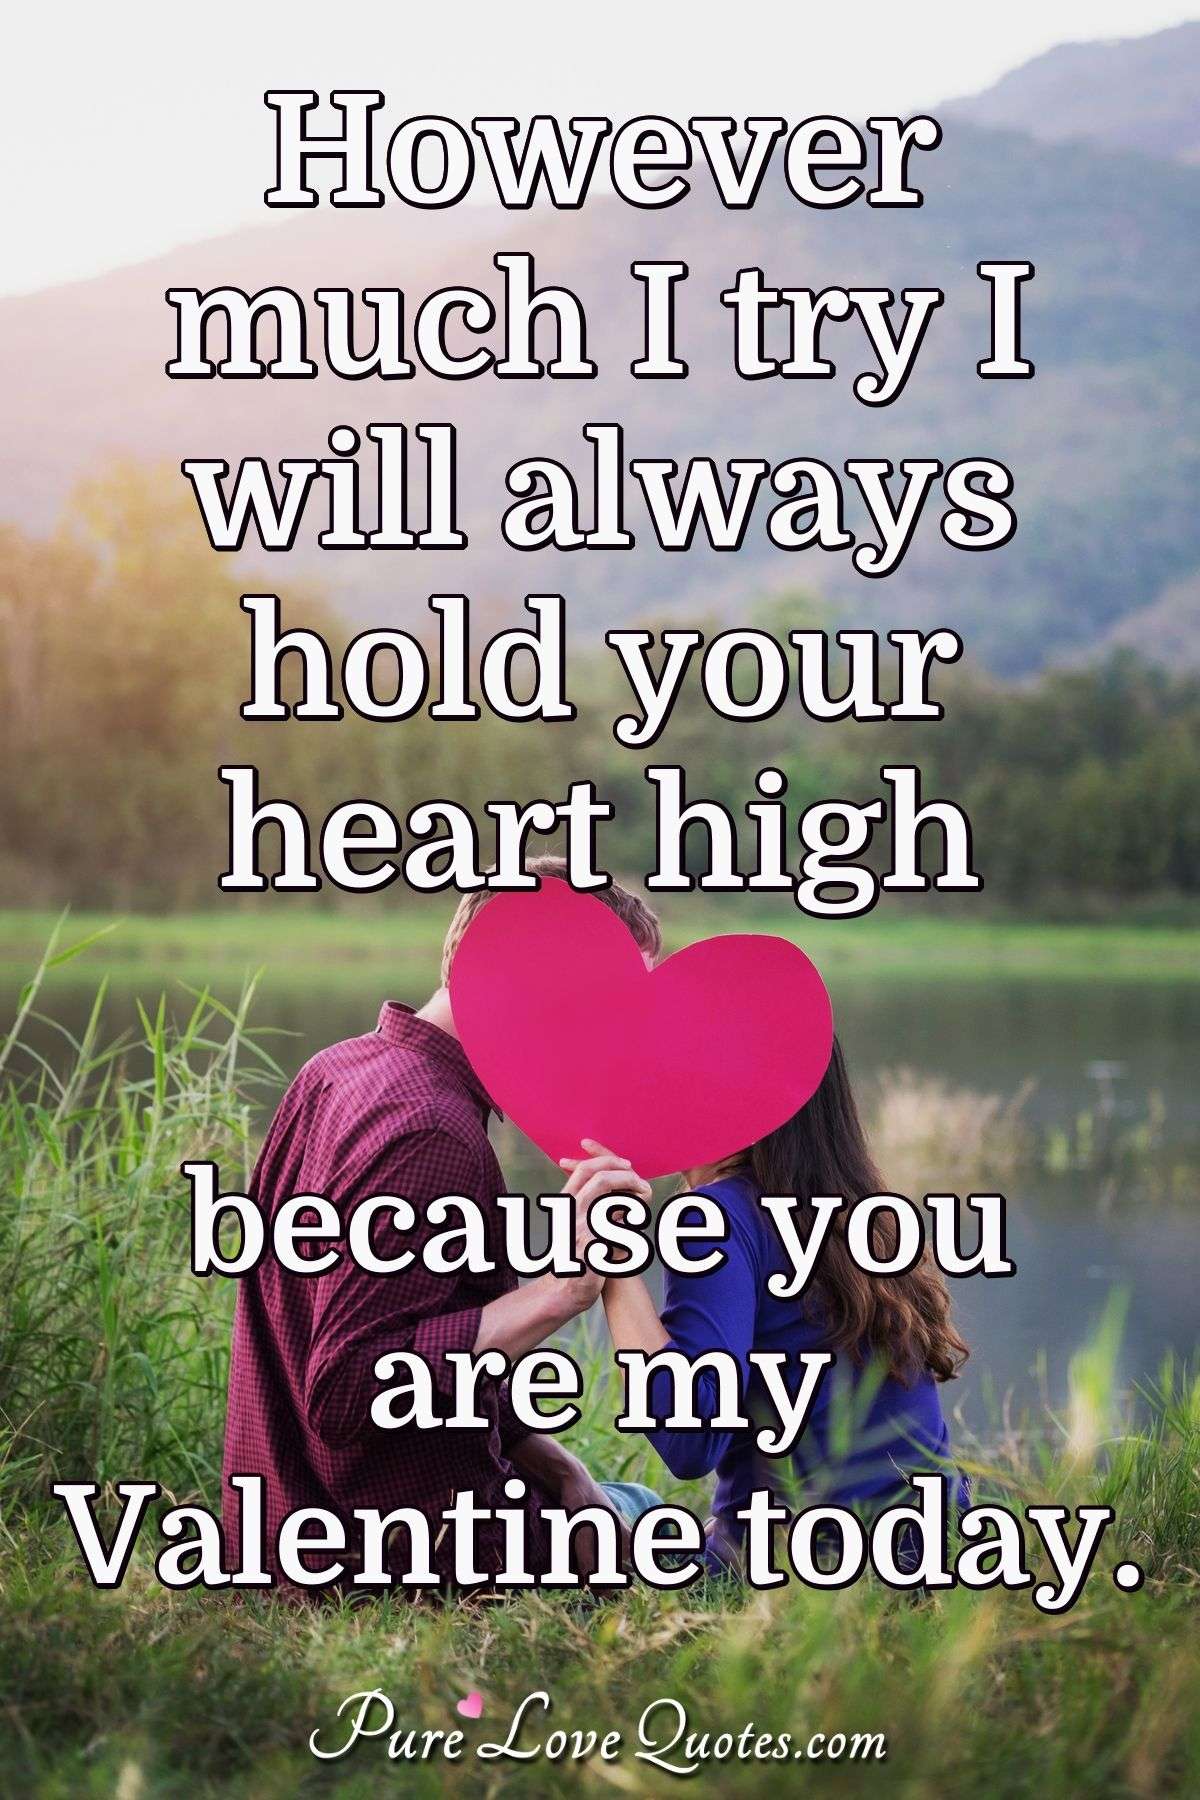 However much I try I will always hold your heart high because you are my Valentine today. - Anonymous